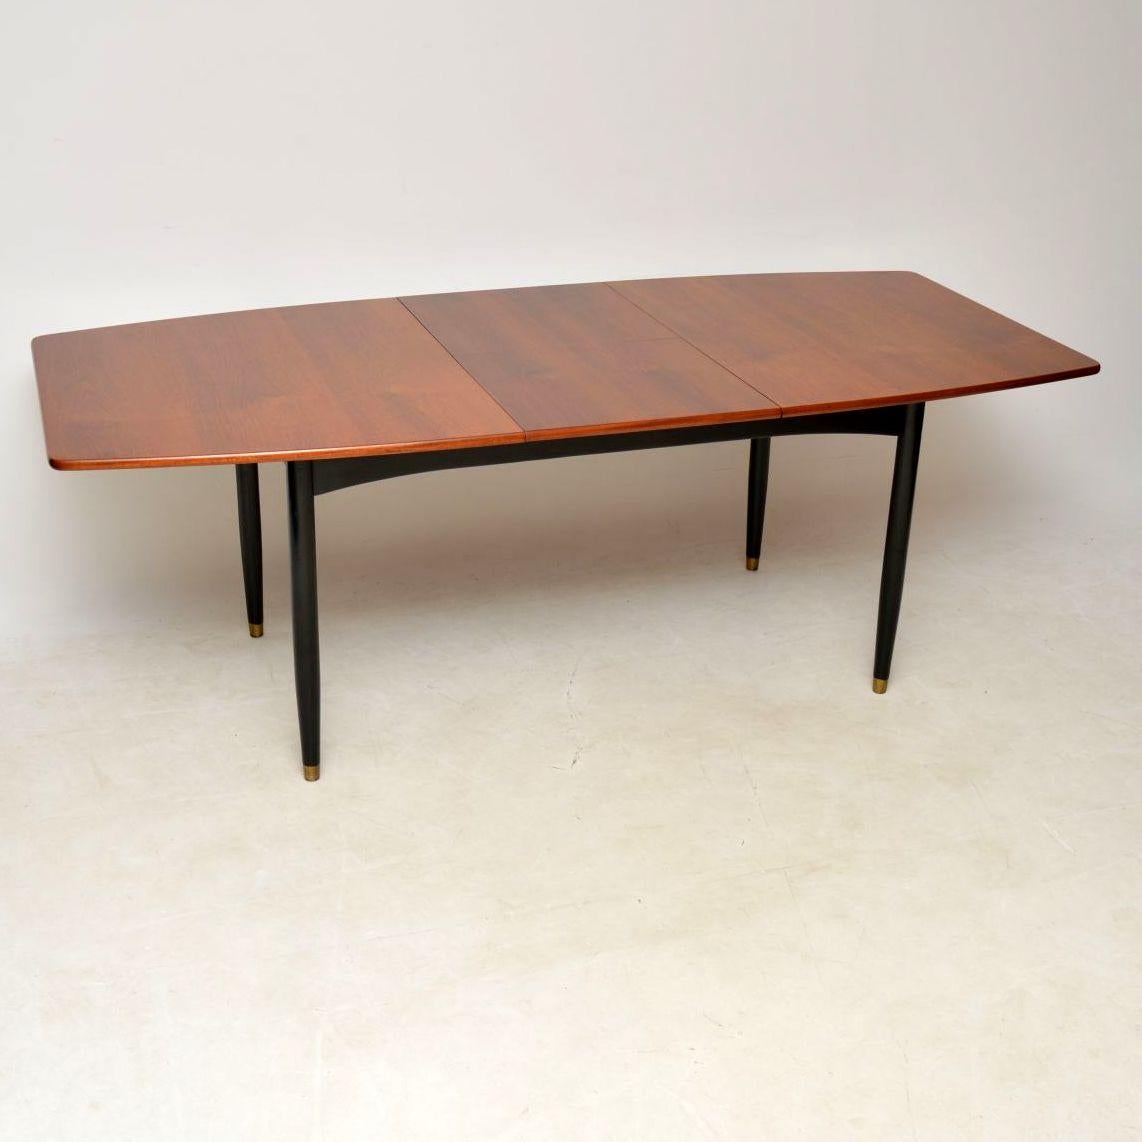 An exceptionally rare and high quality dining table, this was designed by Robin Day and made by Hille in the 1950-60’s.

This has a mahogany top and ebonized wooden legs, with brass feet caps. There is an extending leaf that unfolds from beneath